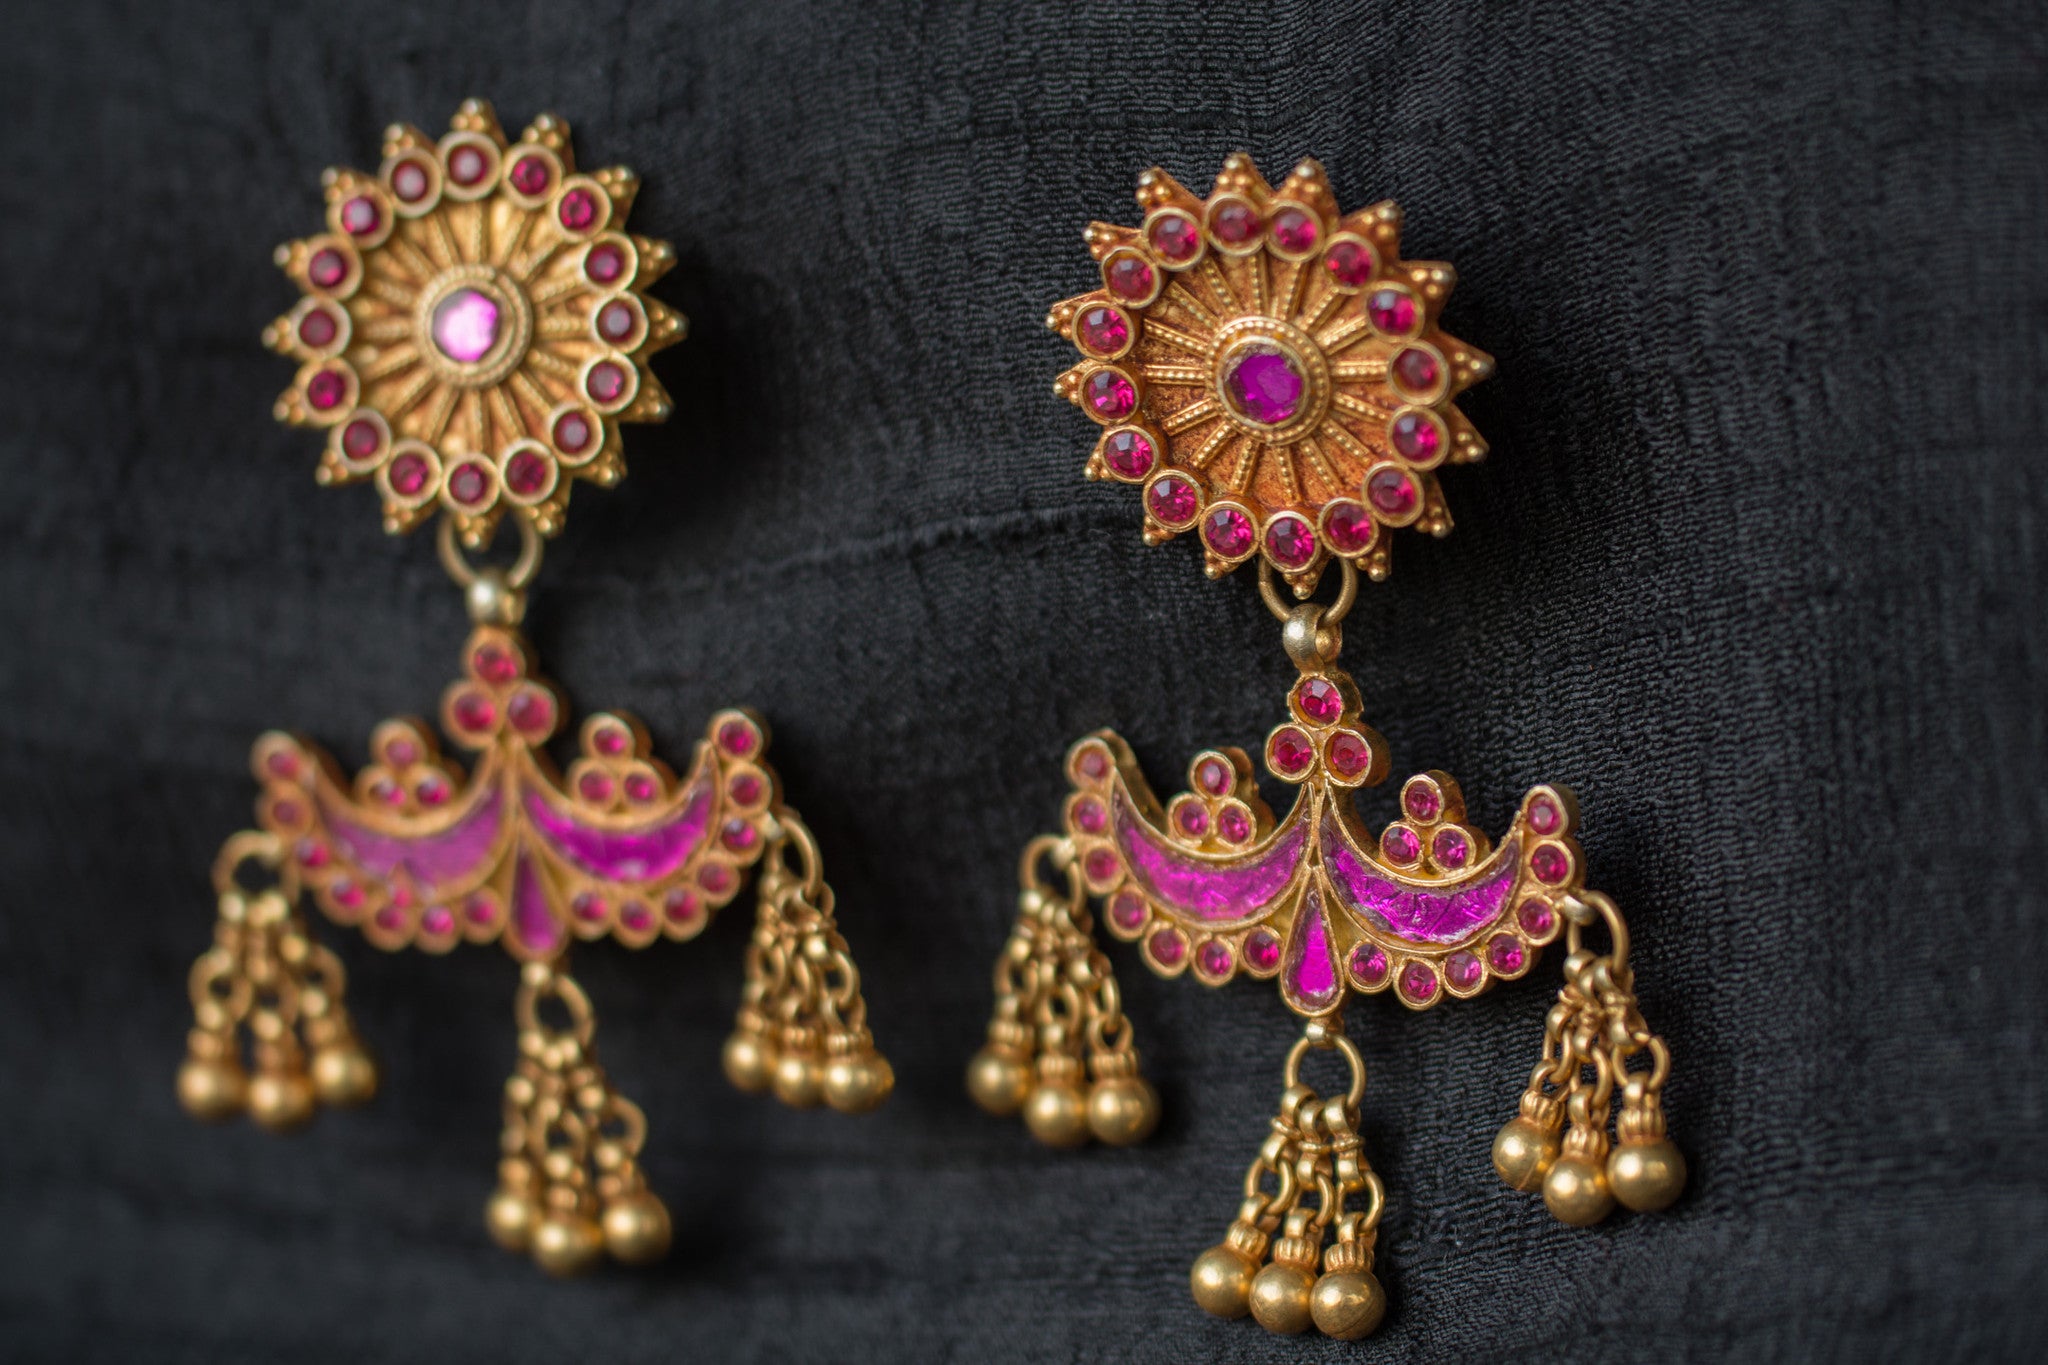 20a496-silver-gold-plated-amrapali-earrings-raised-design-starburst-chandelier-pink-purple-glass-alternate-view